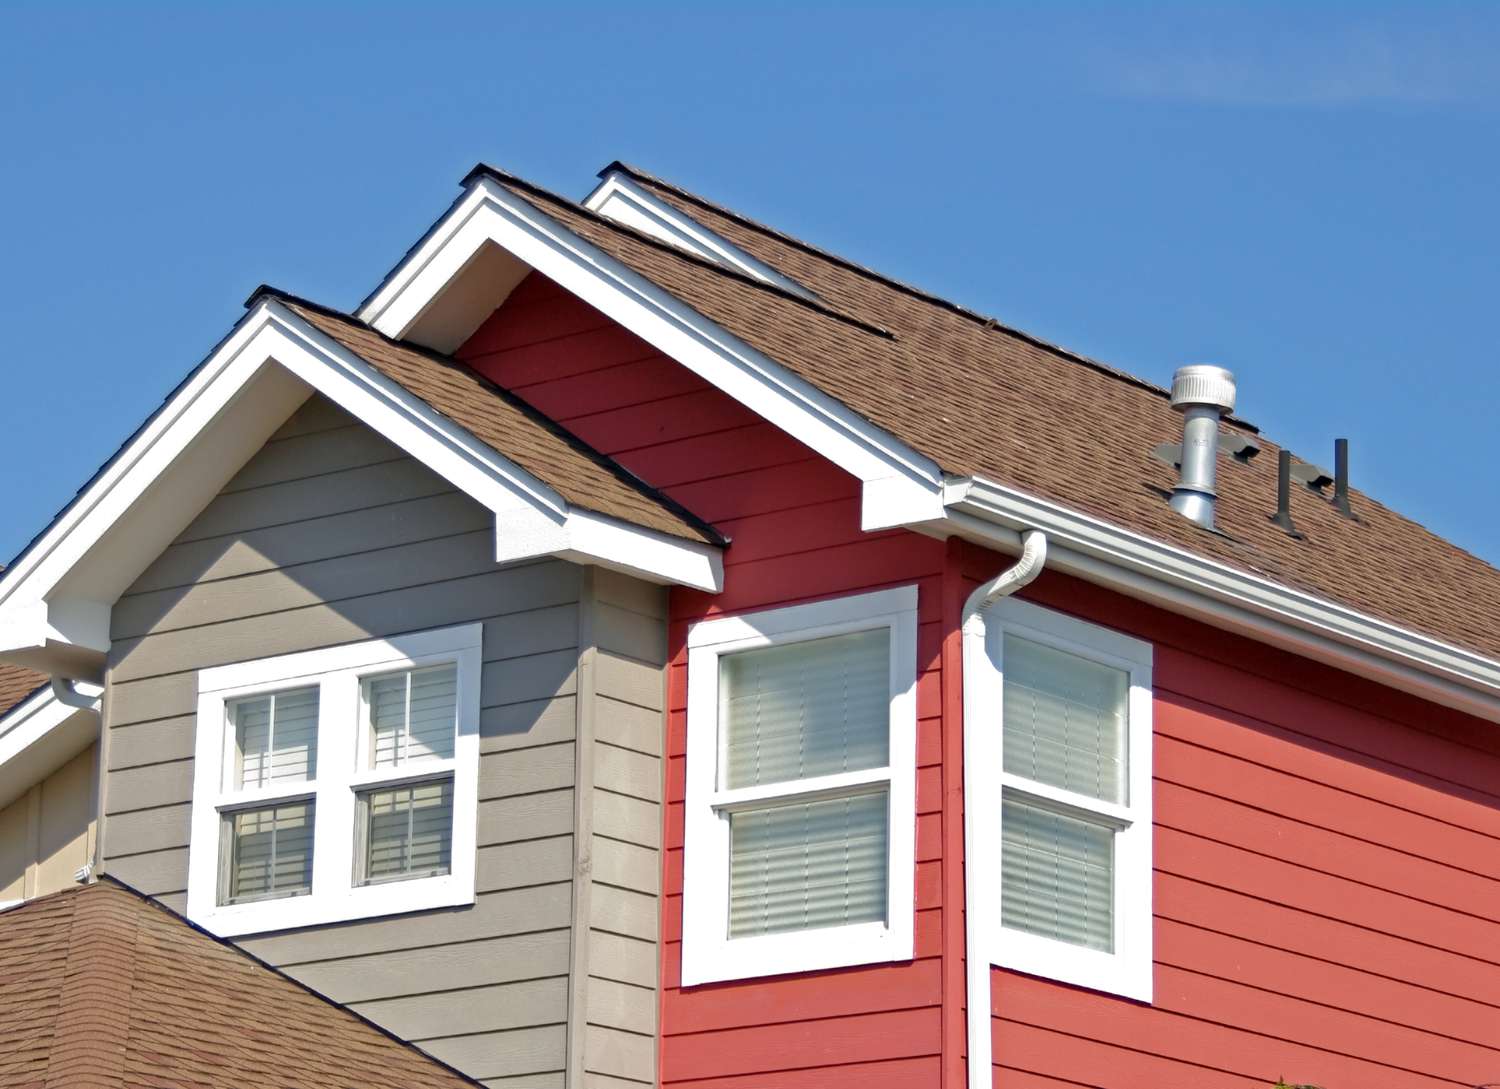 What Is An Eave On A Roof